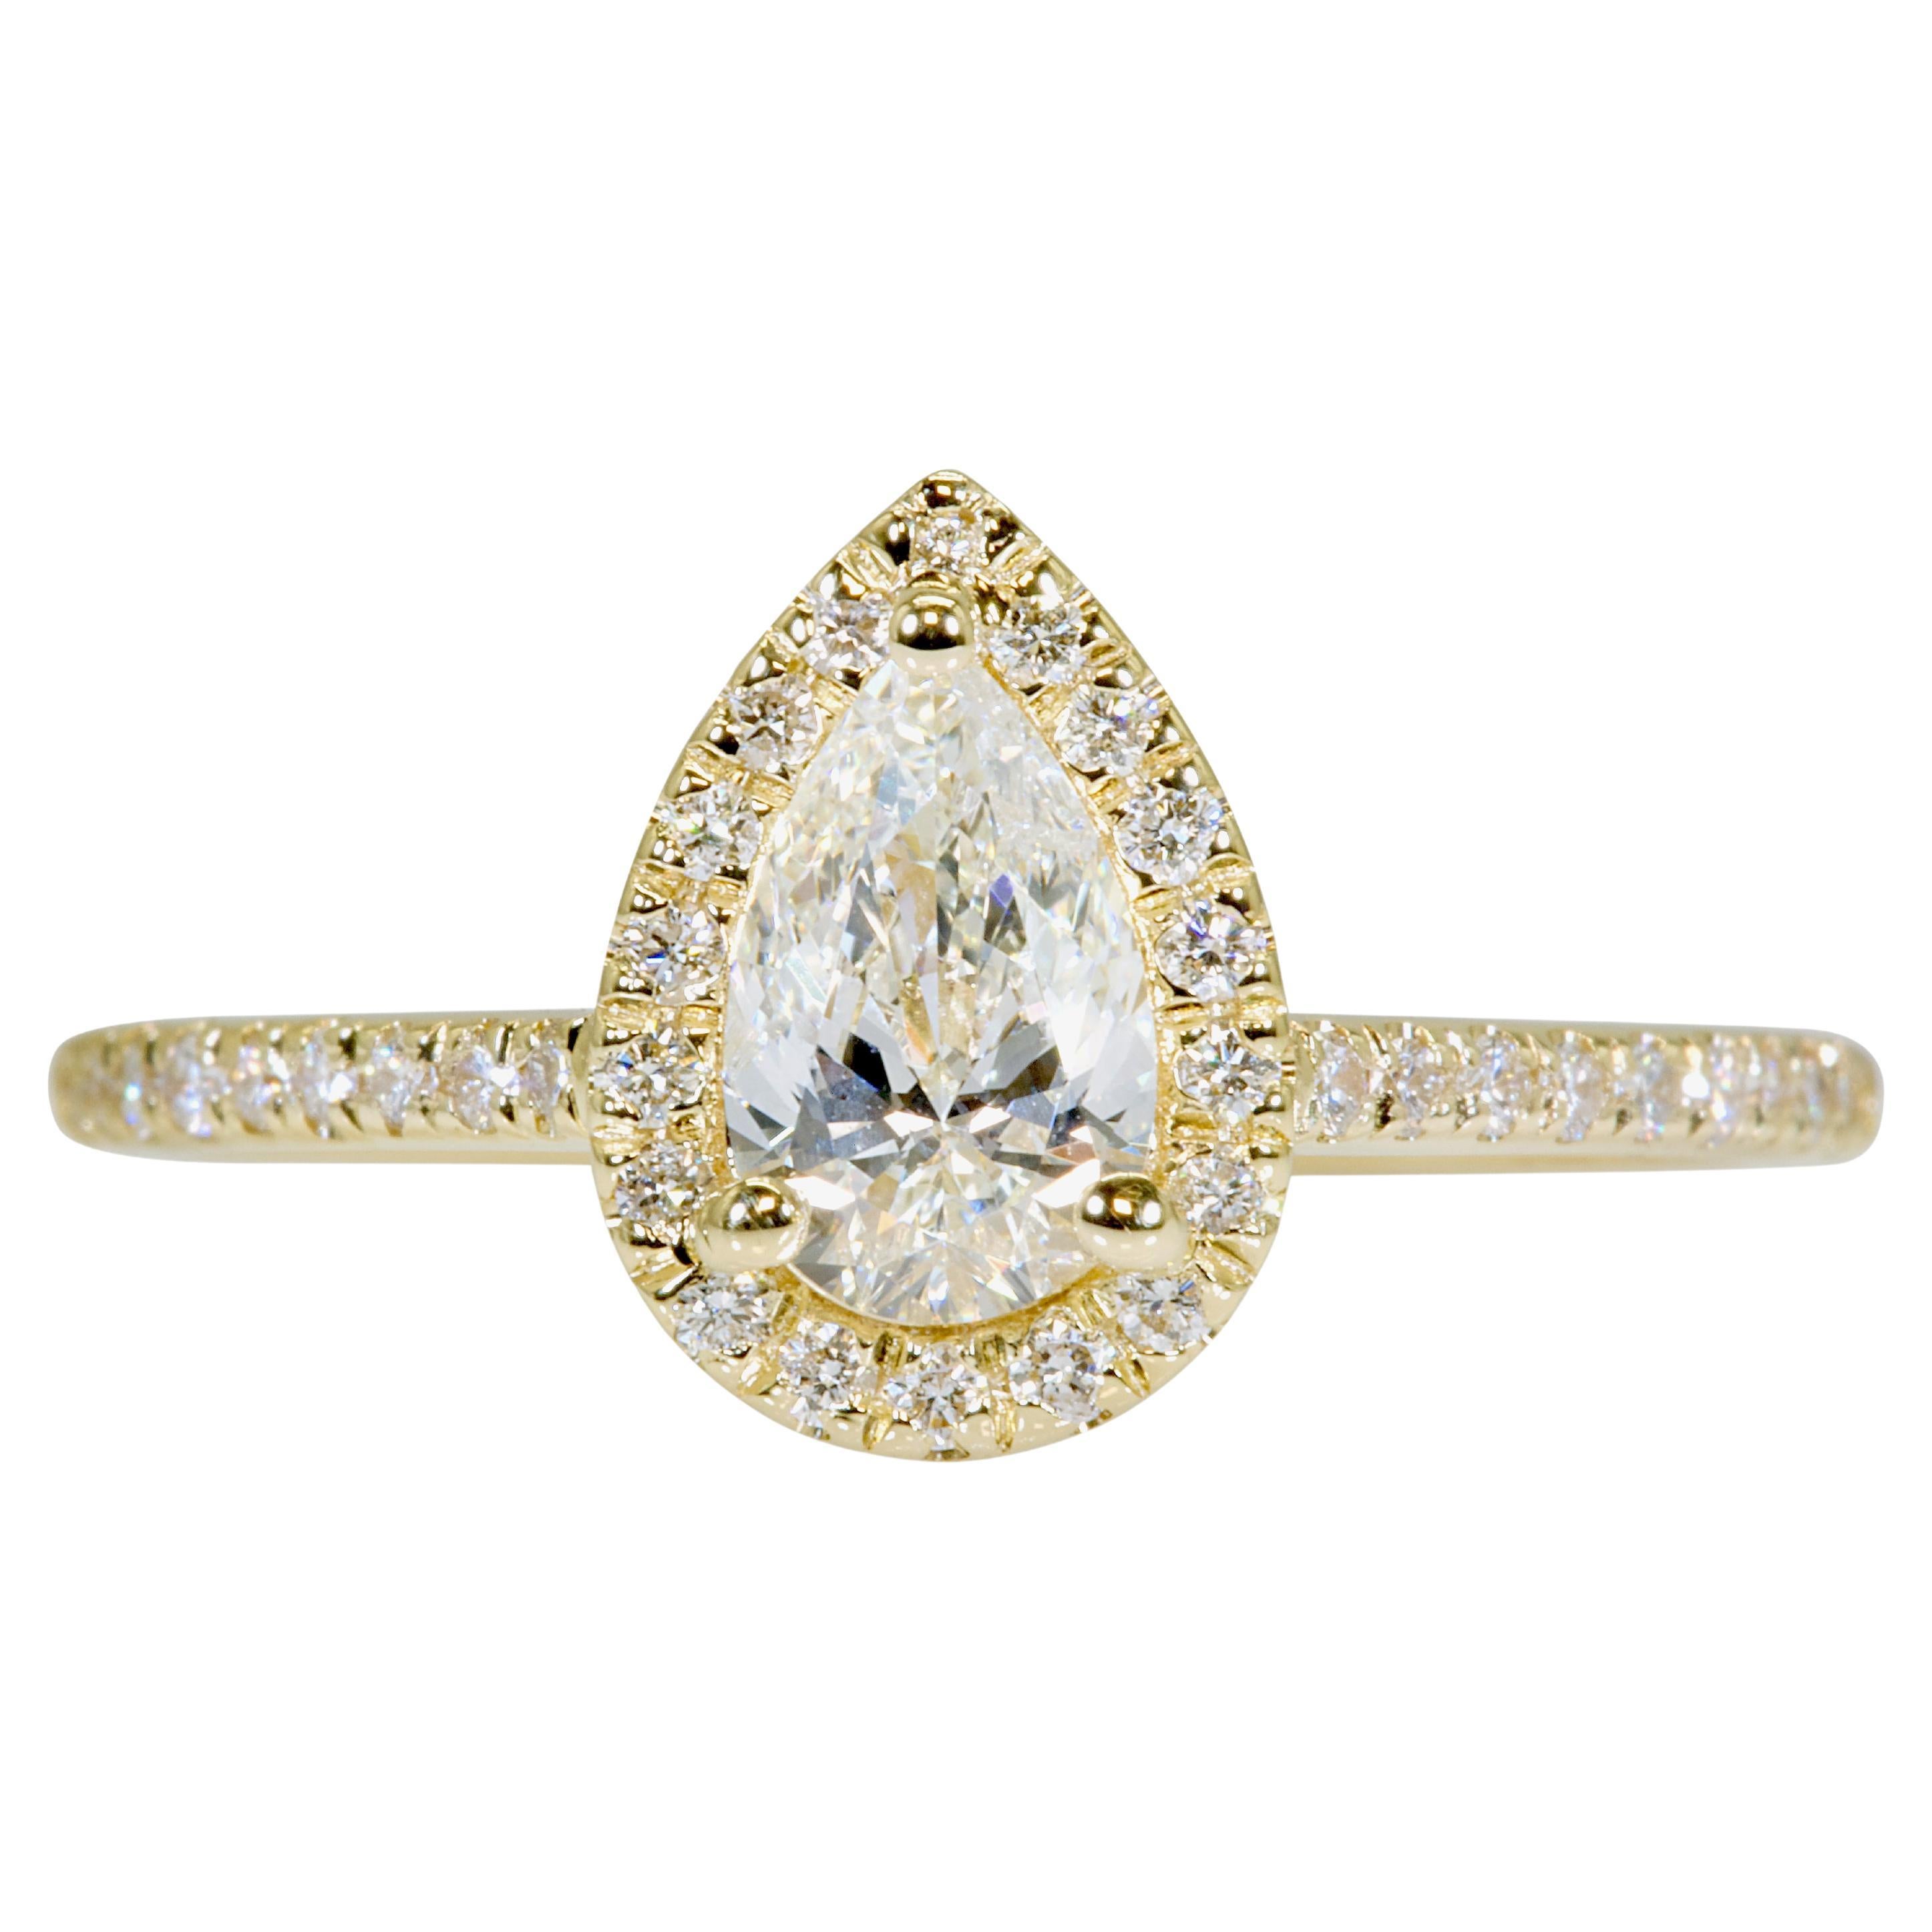 Dazzling 2.66ct Pear-Shaped Diamond Halo Ring in 18k Yellow Gold - GIA Certified